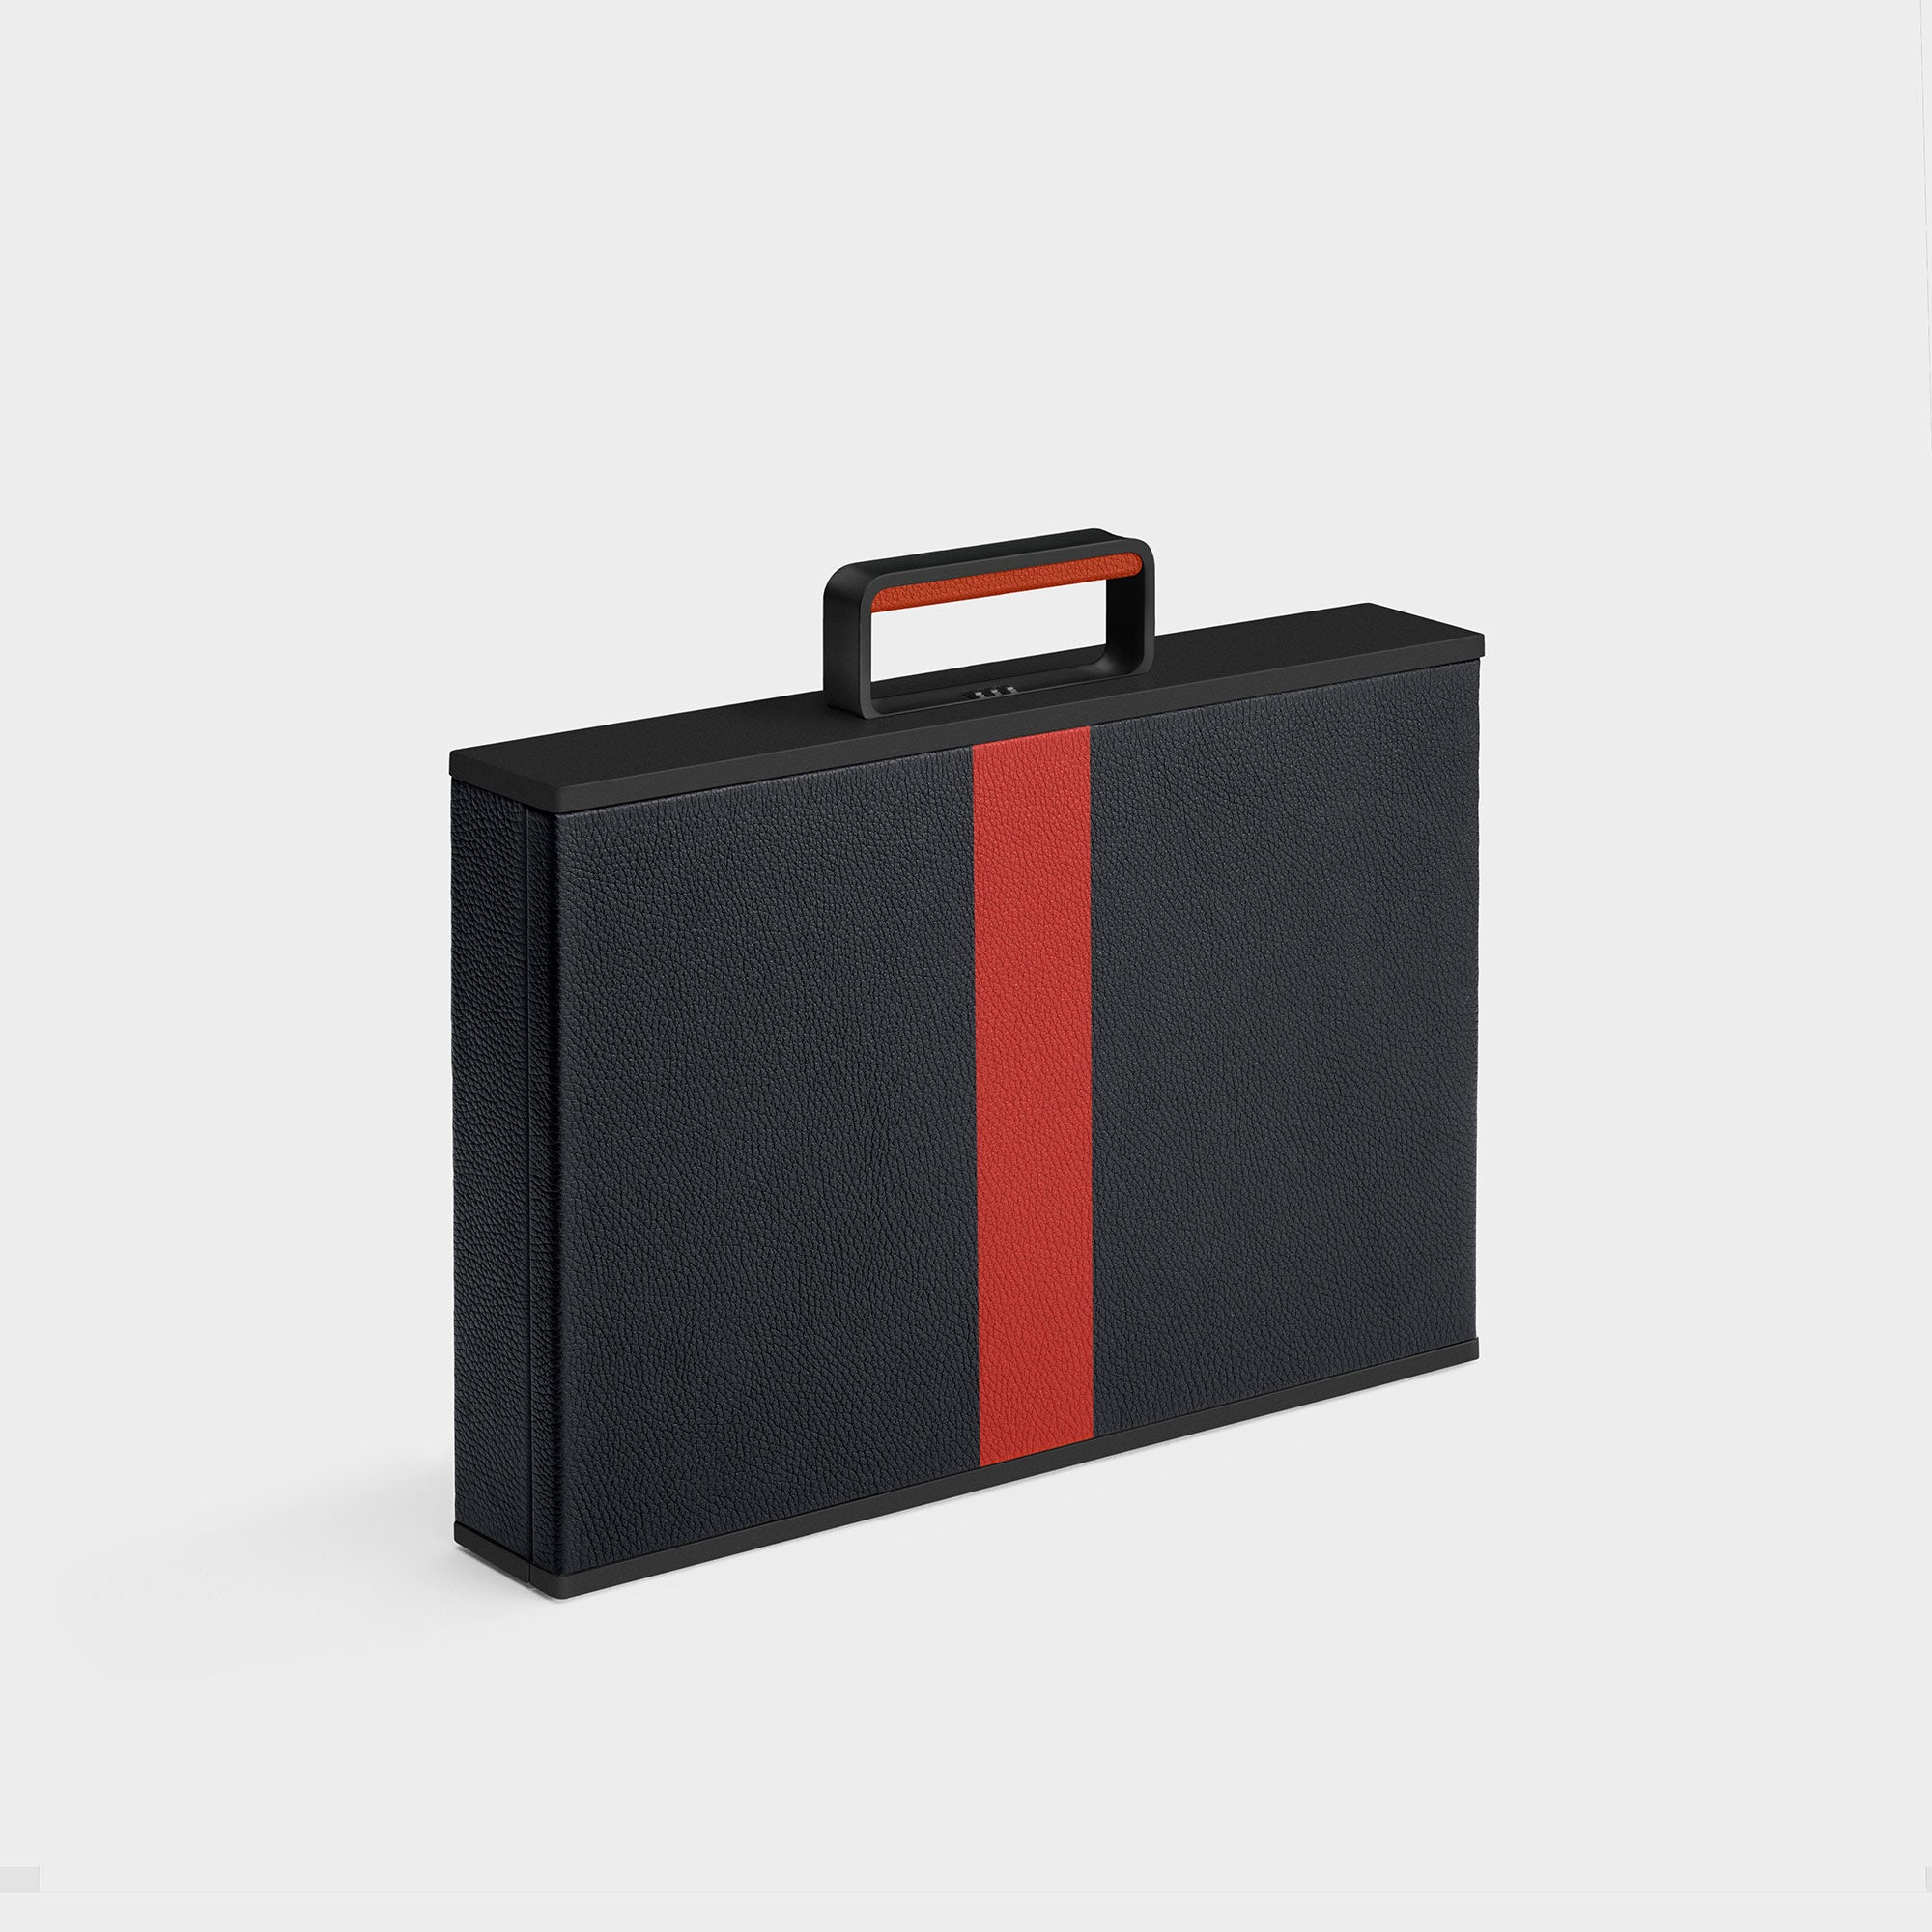 Designer watch briefcase by Charles Simon in all black with bold red leather accents